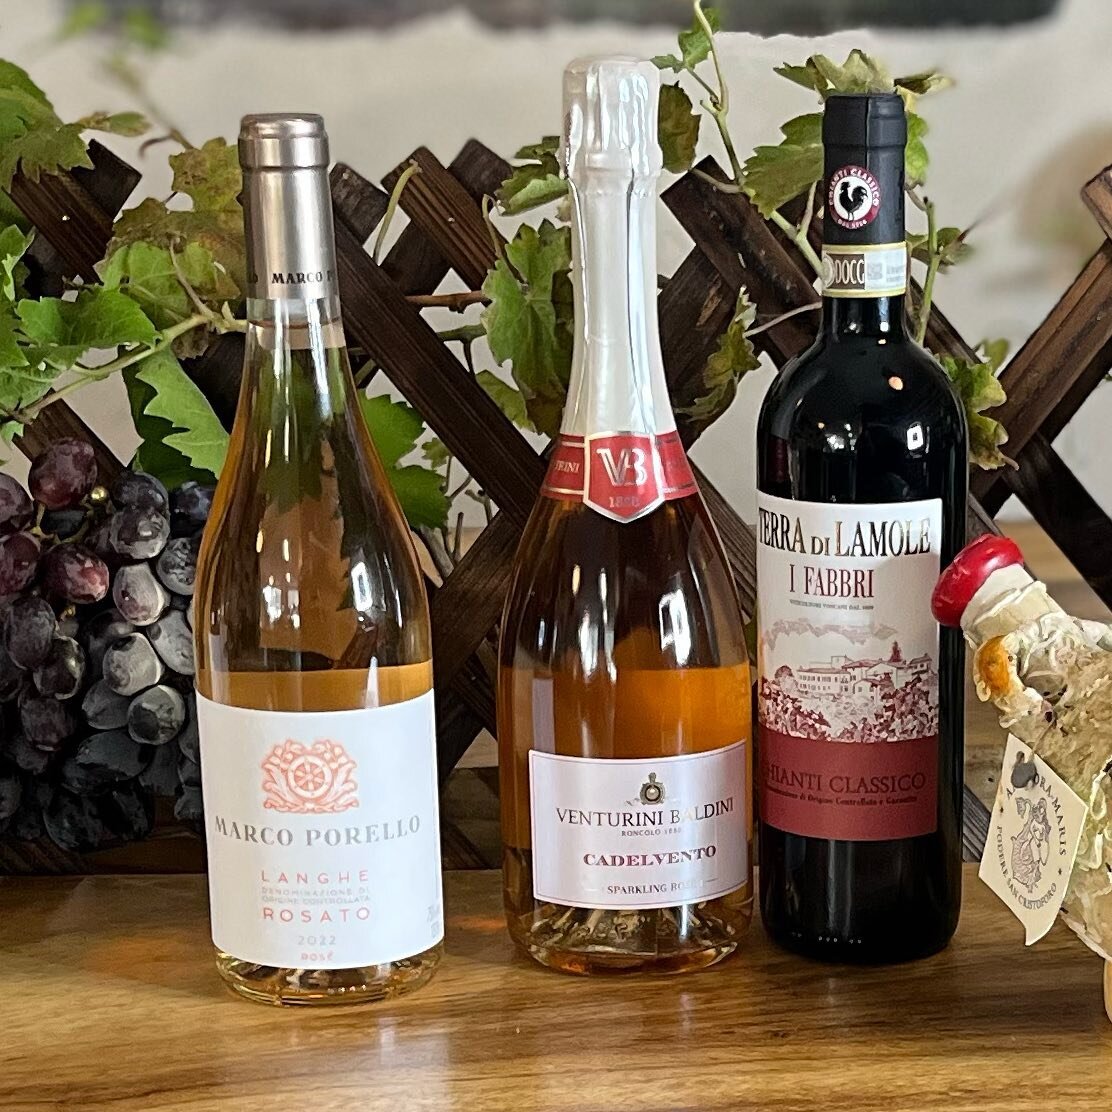 With our seafood courses for our God of Wine menu we are excited to pair from the Langhe region of Piedmonte @marcoporello wines Rosato of Nebbiolo with notes of strawberry and black pepper.

Our Dionysian feast is accompanied by a ros&eacute; of Lam